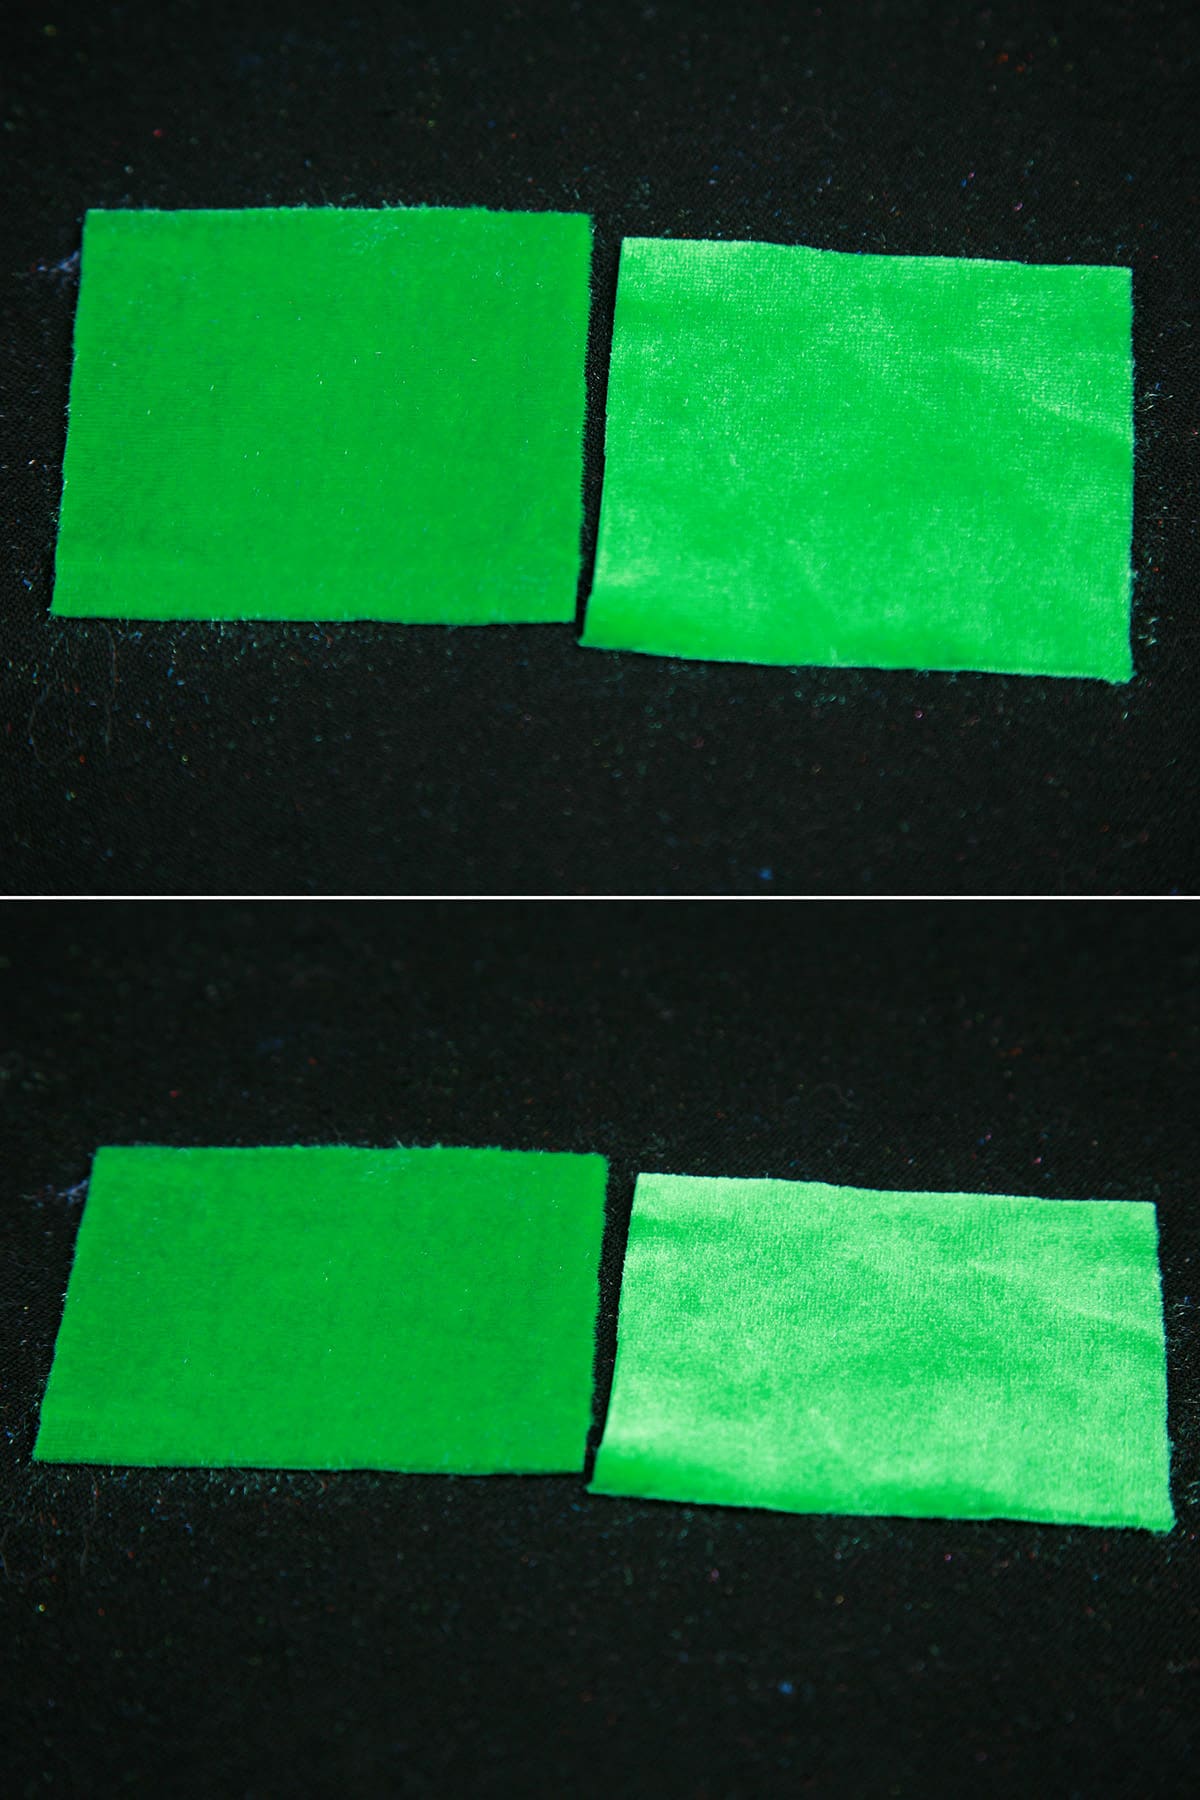 A two part image showing 2 squares of green velvet at different angles.